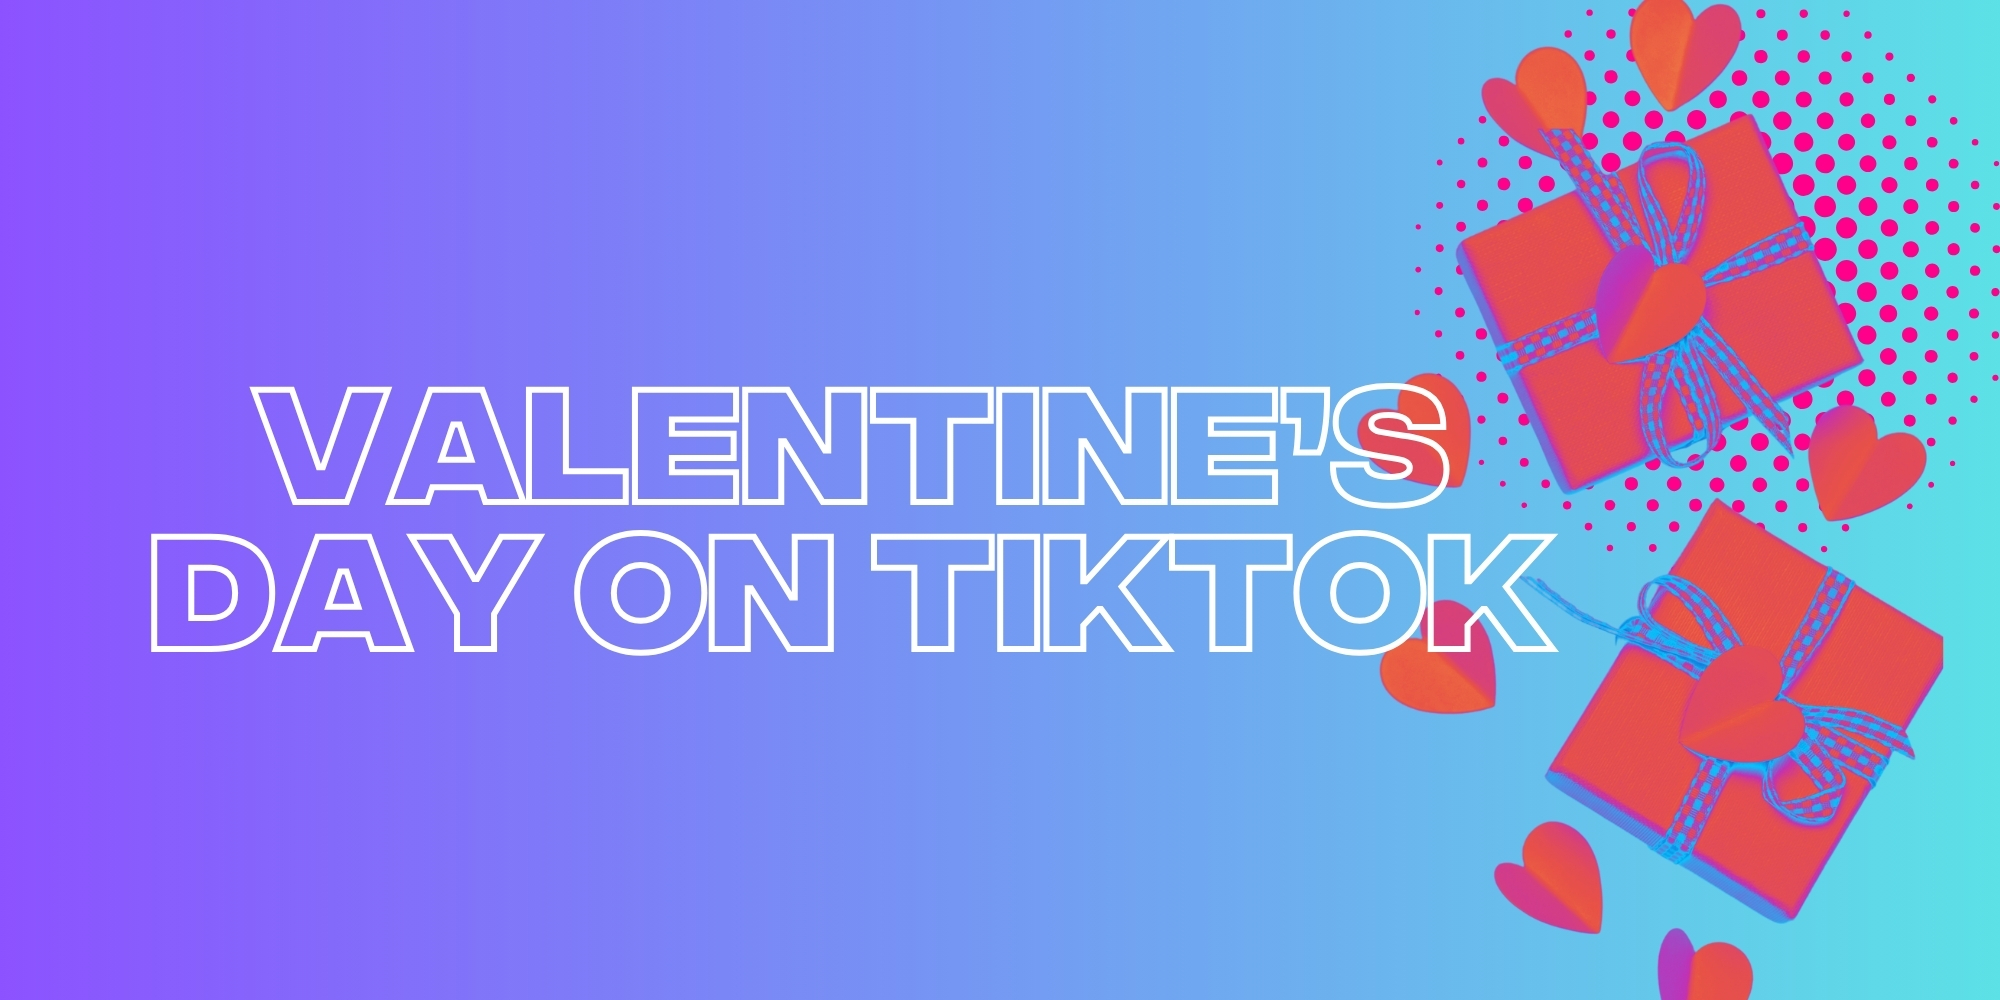 Making The Most Of TikTok This Valentine’s Day